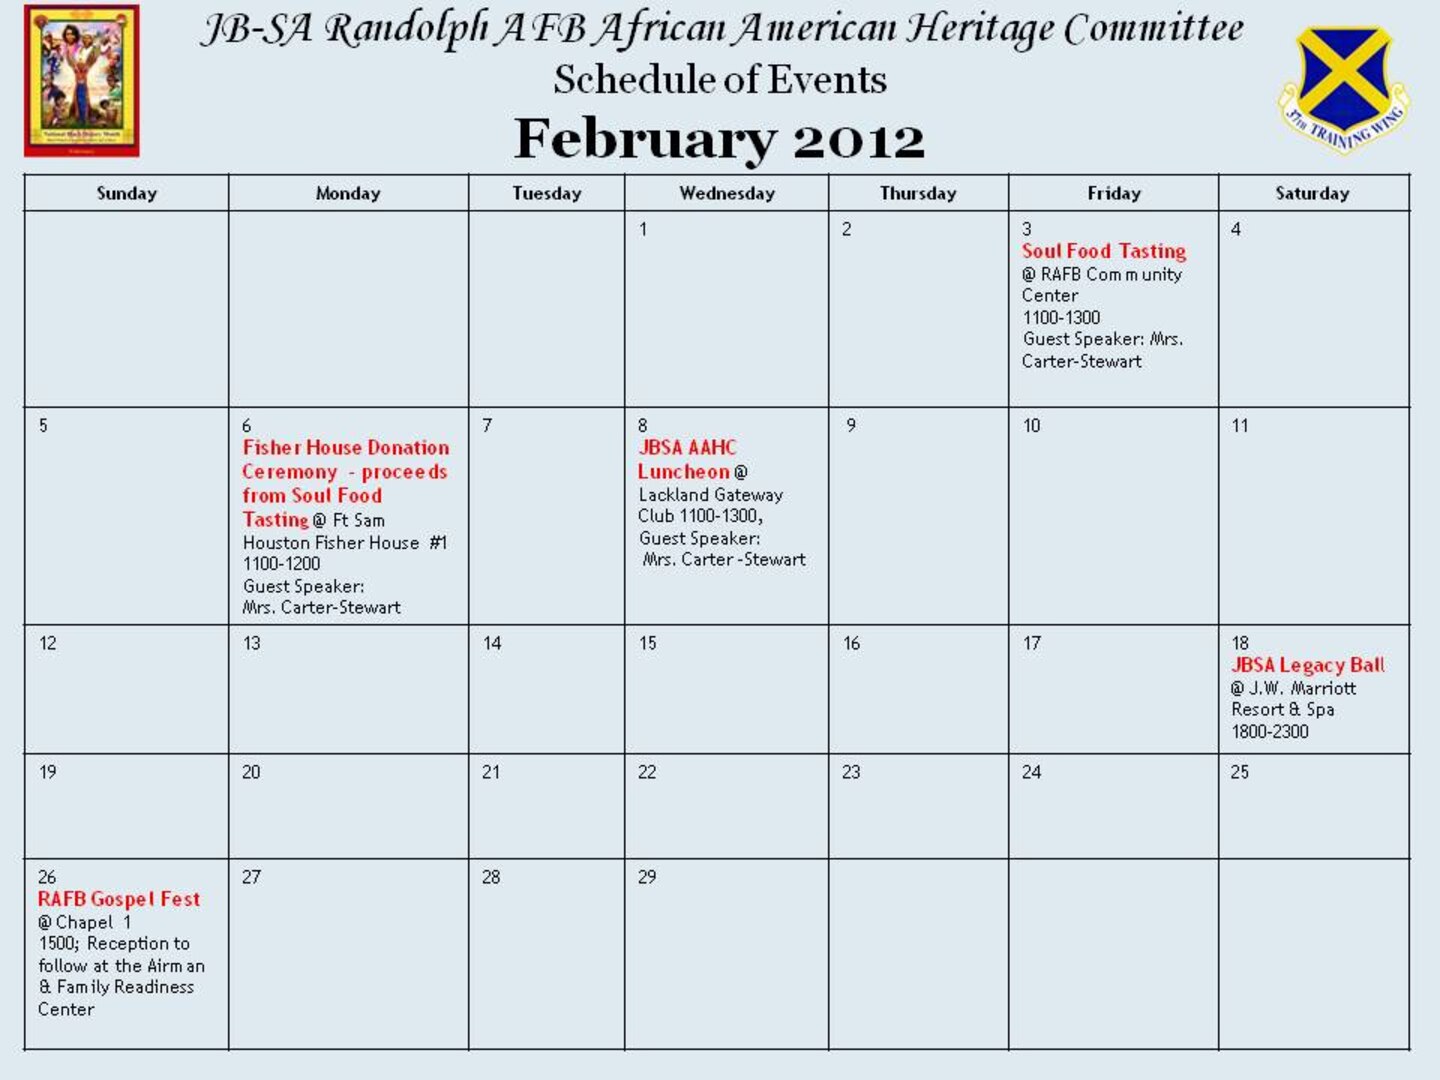 African American Heritage Committee schedule of events > Joint Base San